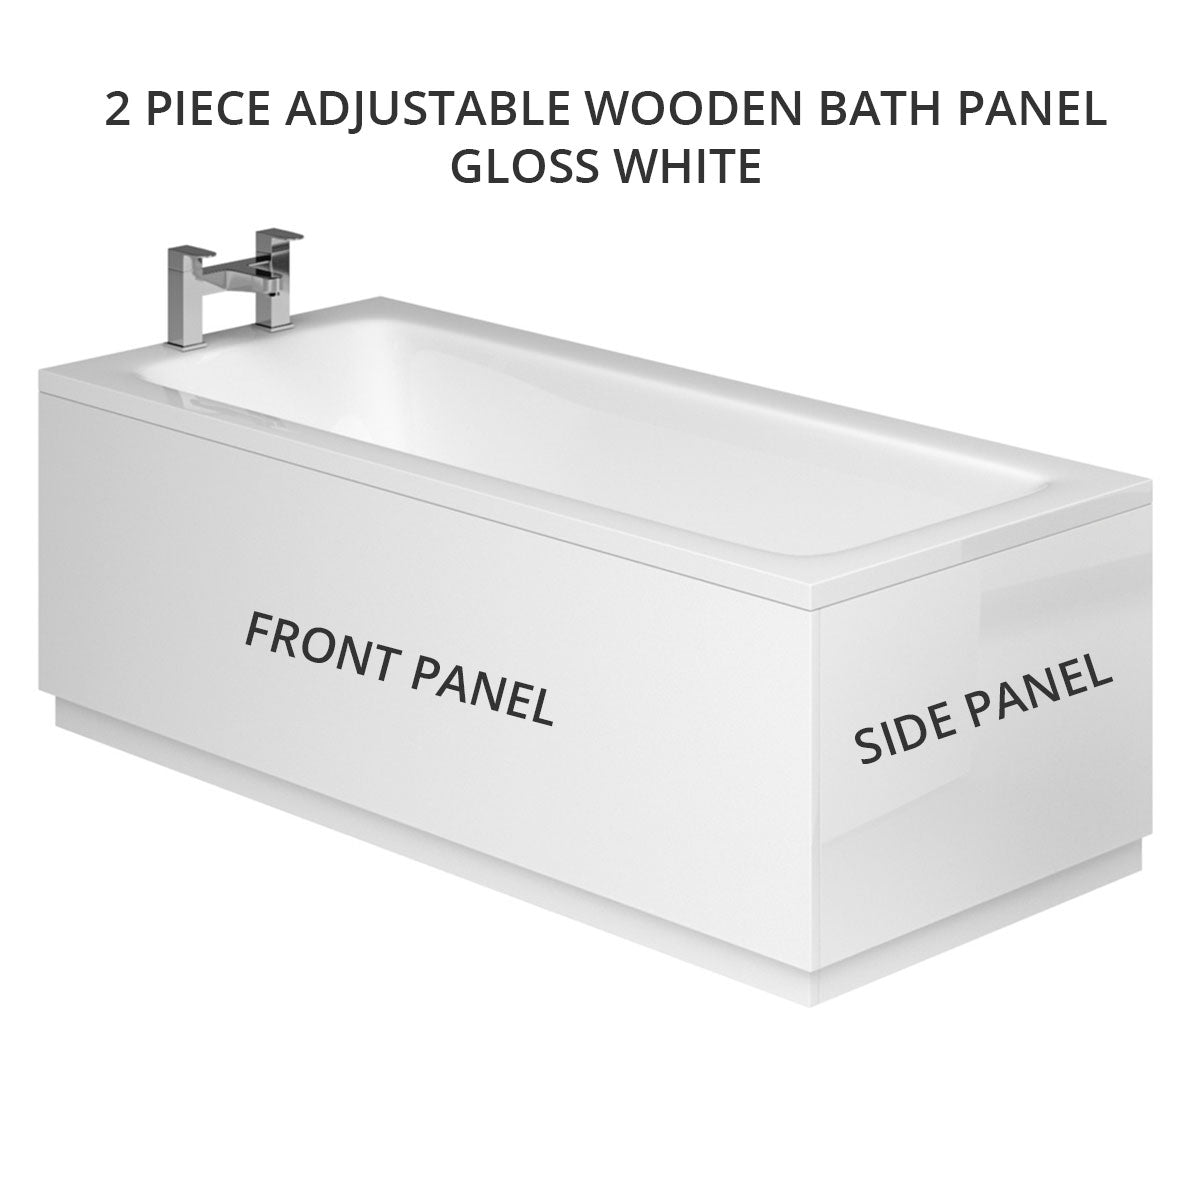 2 Piece Adjustable Moisture Resistant Wooden Bath Panel in White Gloss